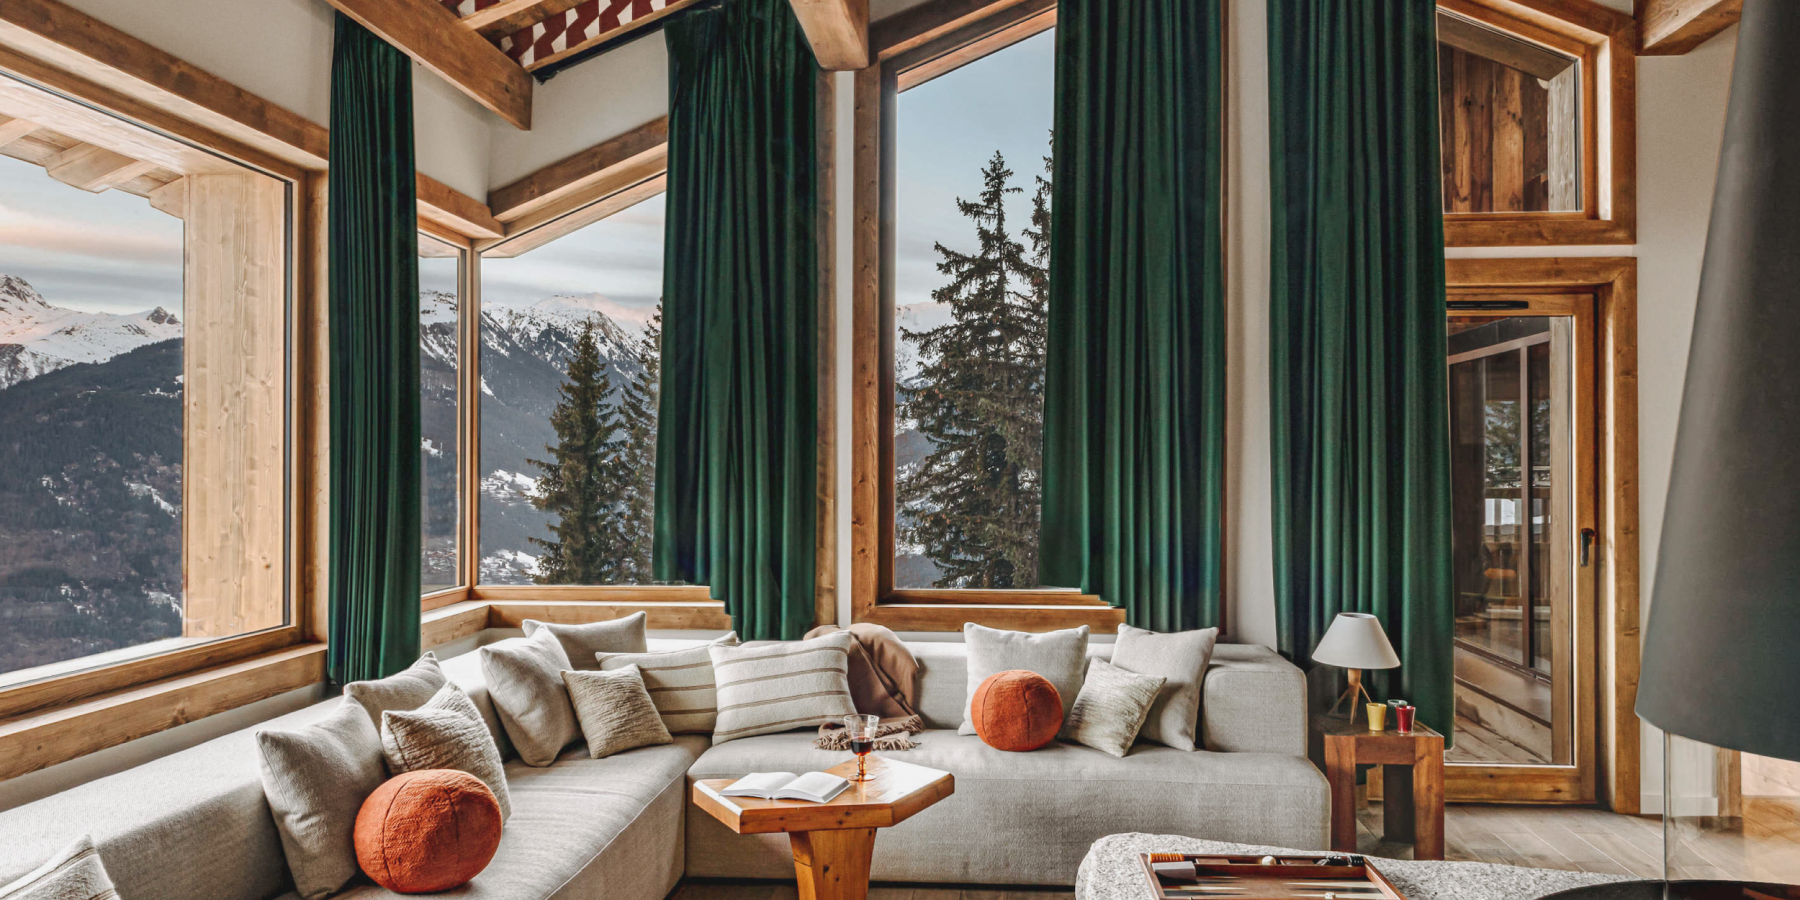 Mountain view from a cozy chalet living room.